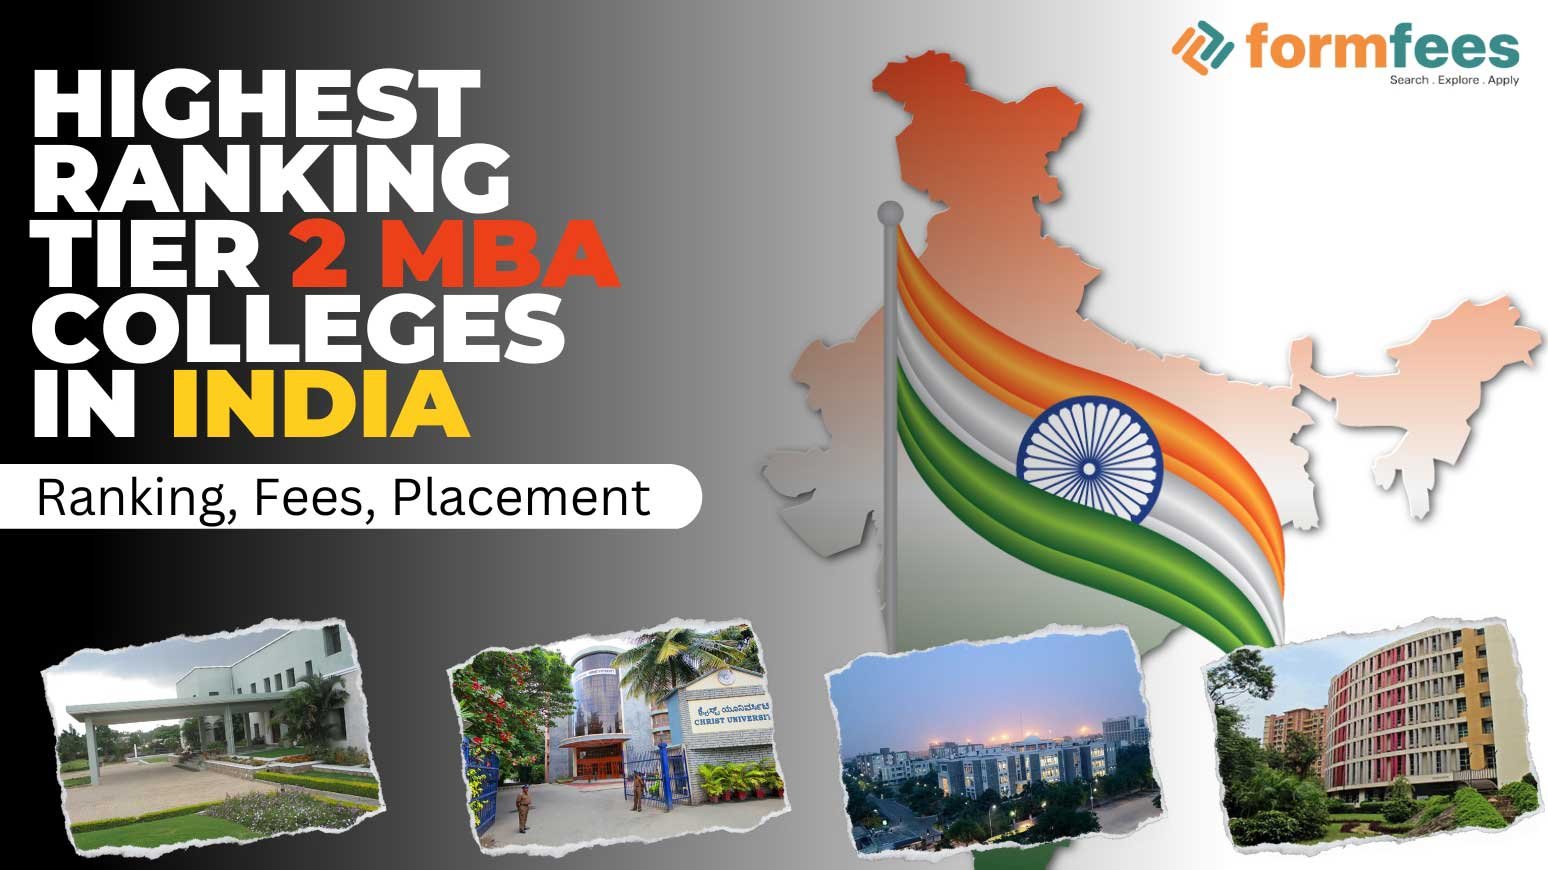 Highest Ranking Tier 2 MBA Colleges in India